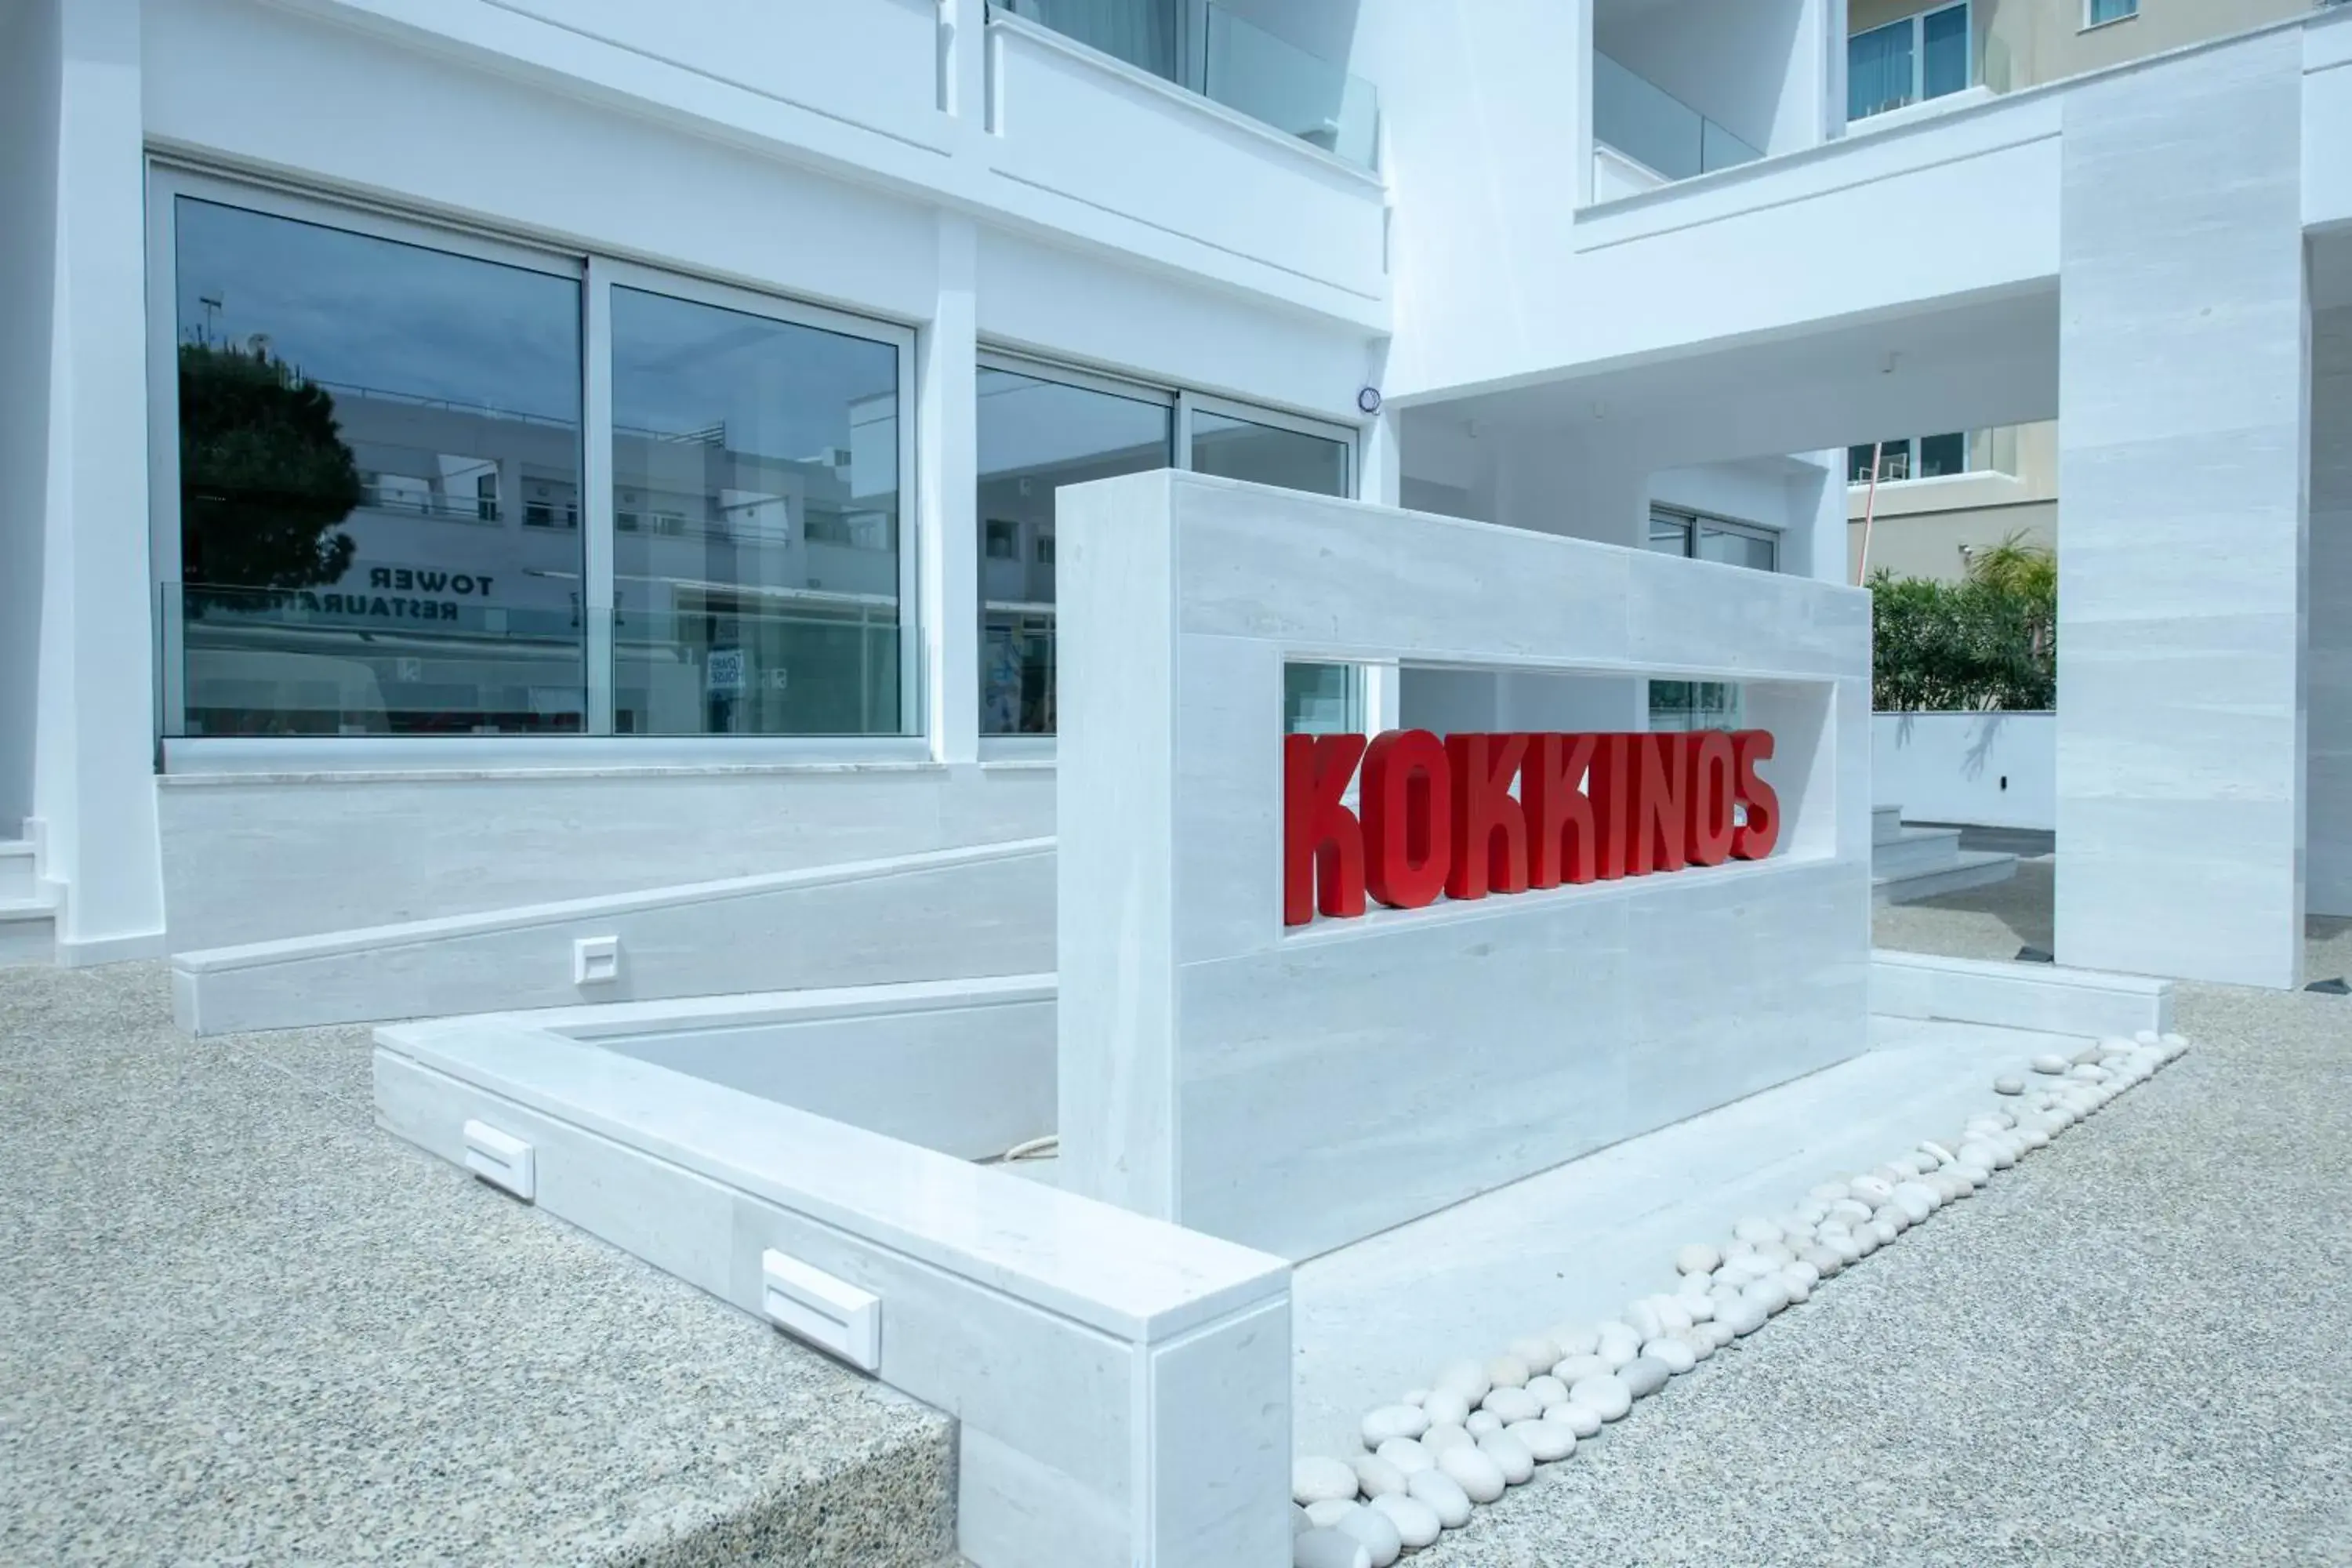 Property building in Kokkinos Boutique Hotel